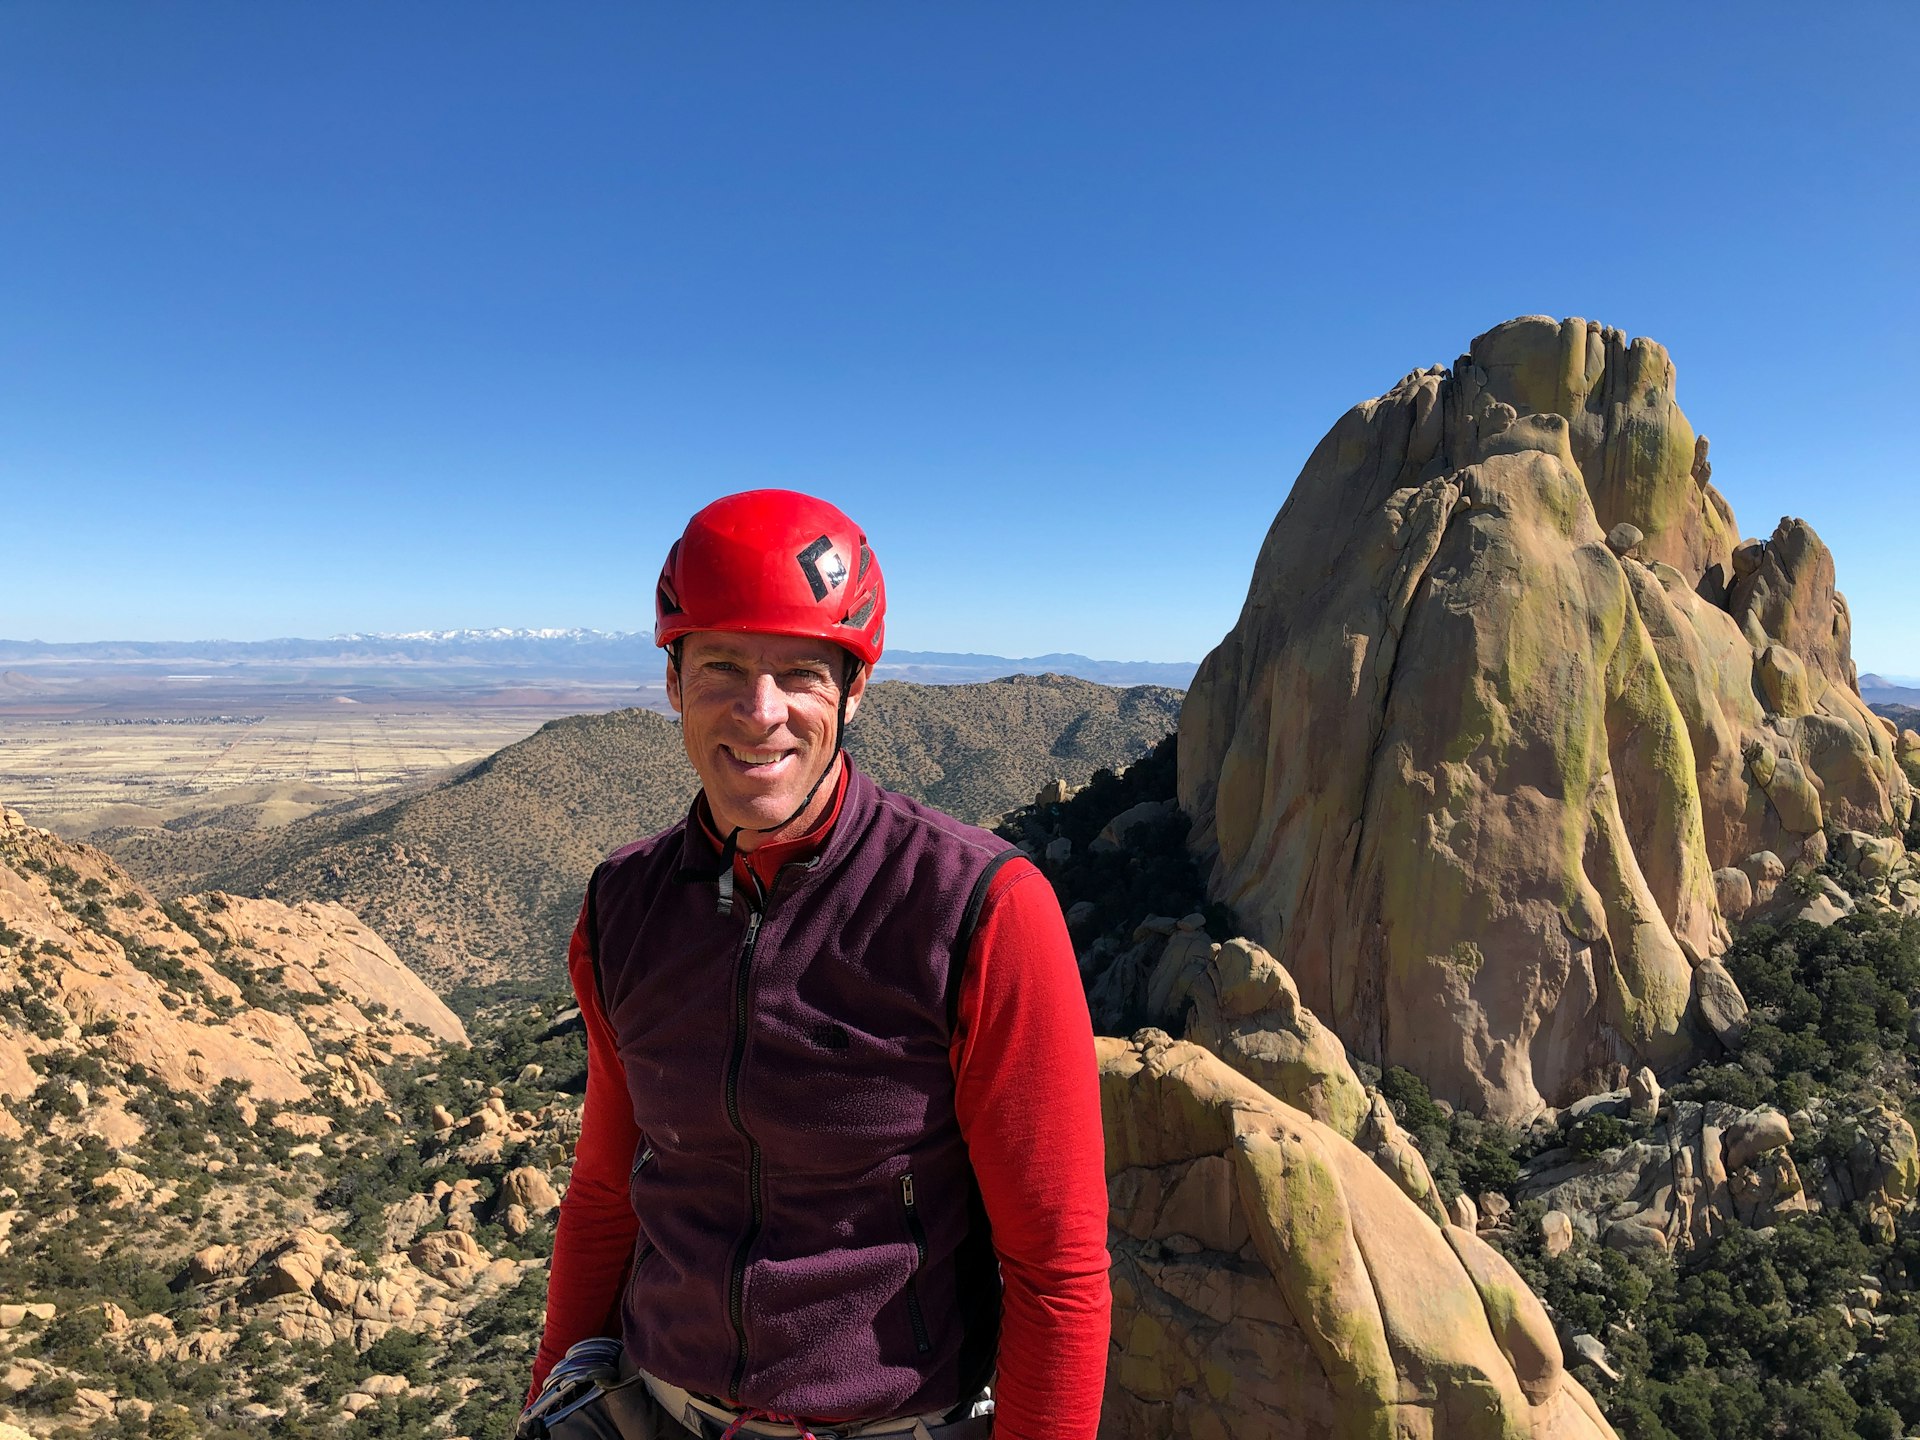 A white man wearing a red helmet smiles at the camera from high altitude with rocky terrain